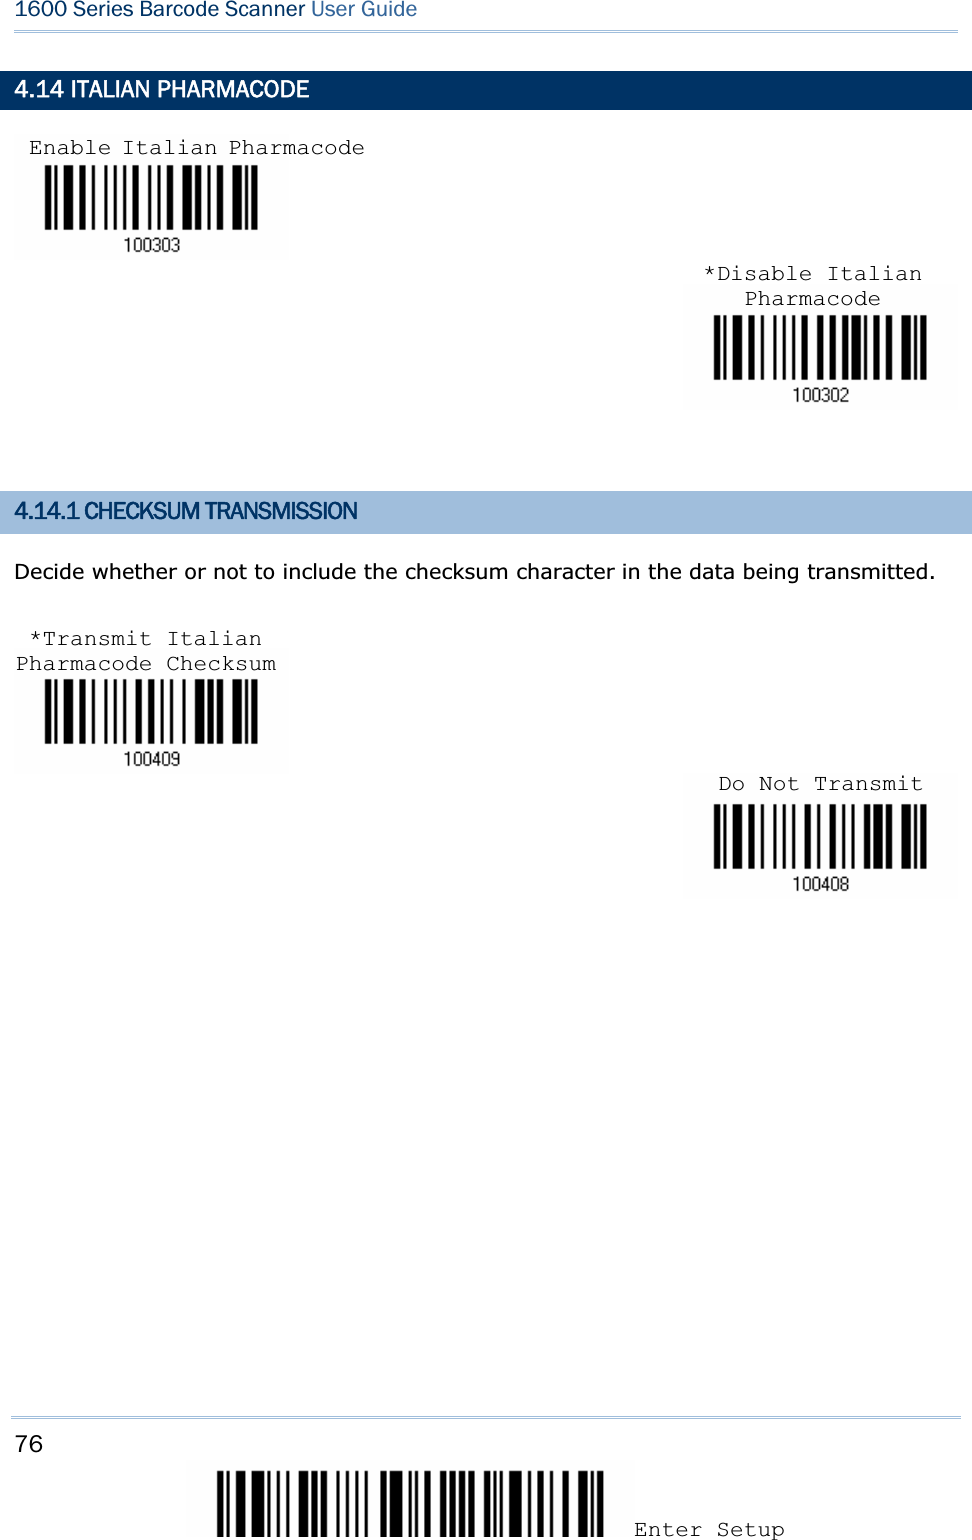 76Enter Setup 1600 Series Barcode Scanner User Guide4.14 ITALIAN PHARMACODE 4.14.1 CHECKSUM TRANSMISSION Decide whether or not to include the checksum character in the data being transmitted. Enable Italian Pharmacode*Disable Italian Pharmacode*Transmit Italian Pharmacode ChecksumDo Not Transmit